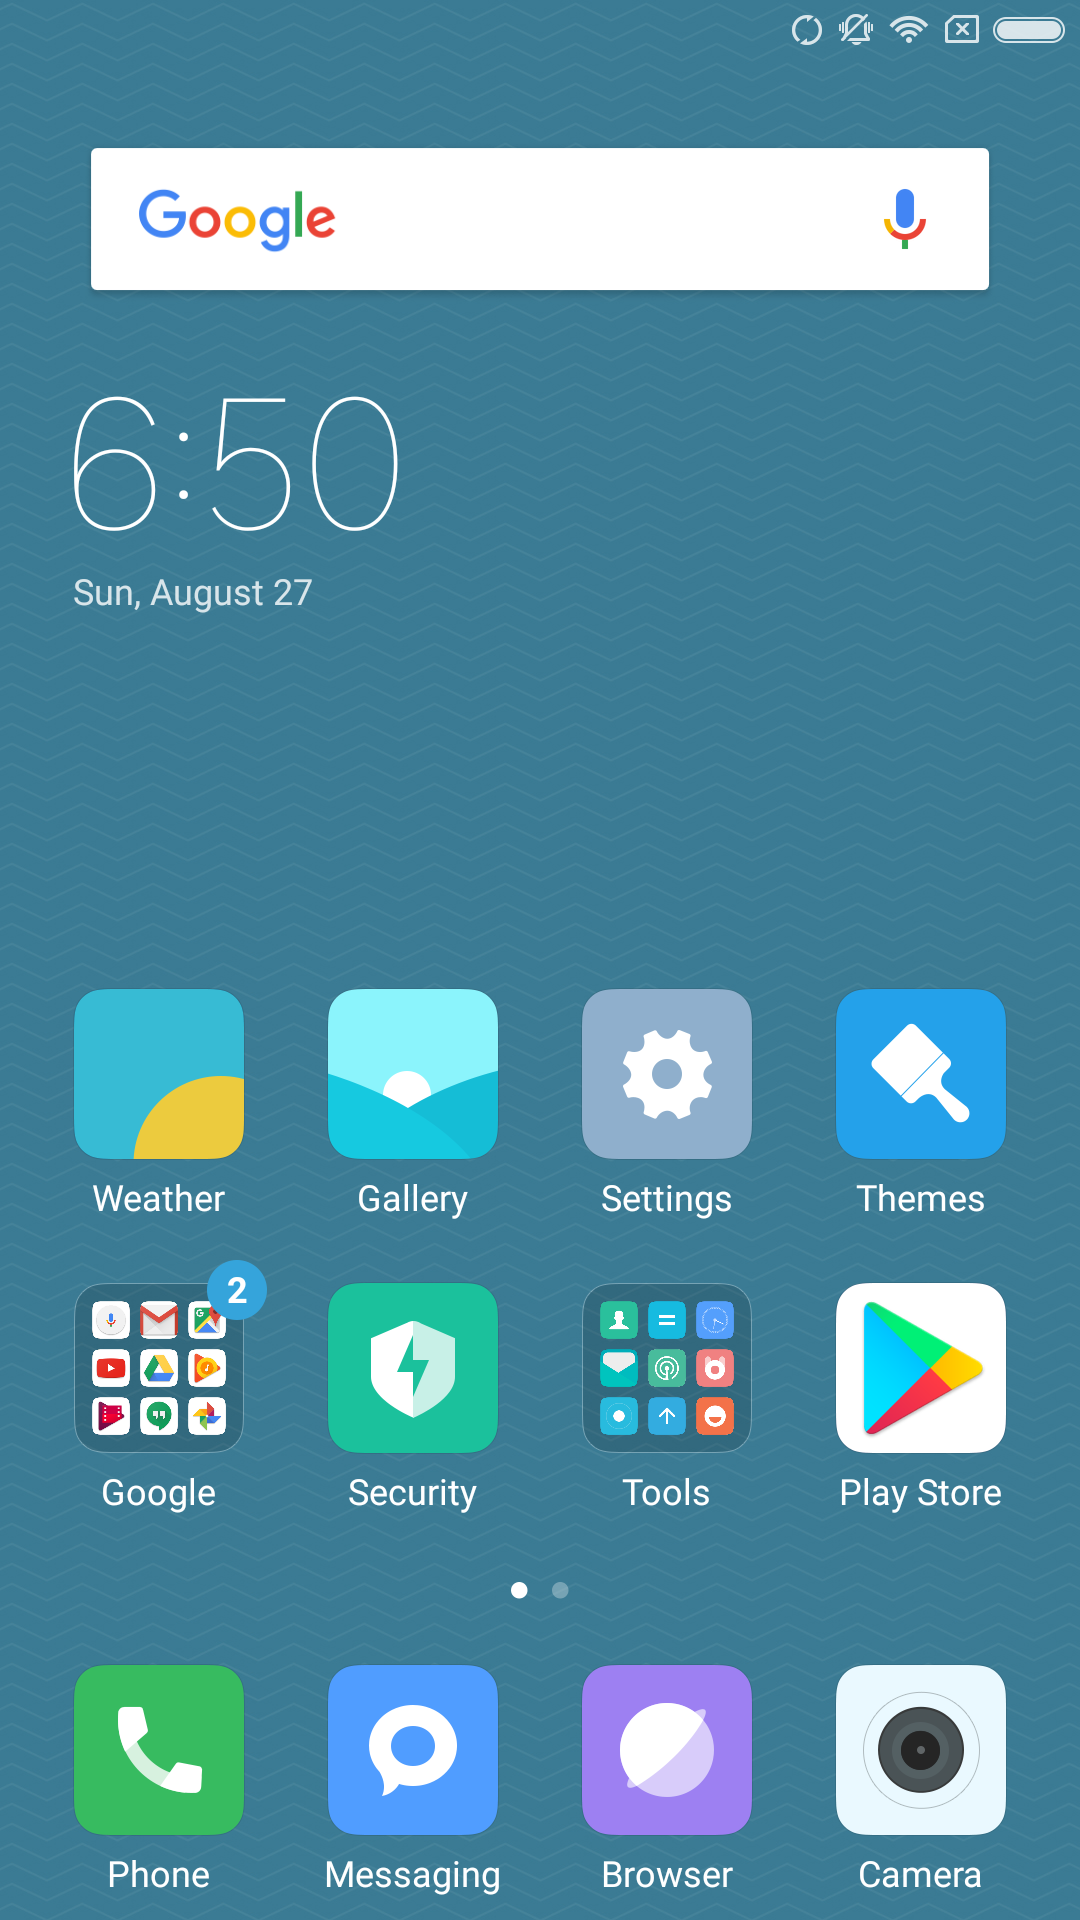 Change wallpaper on Xiaomi MIUI Android phone? - Ask Dave Taylor